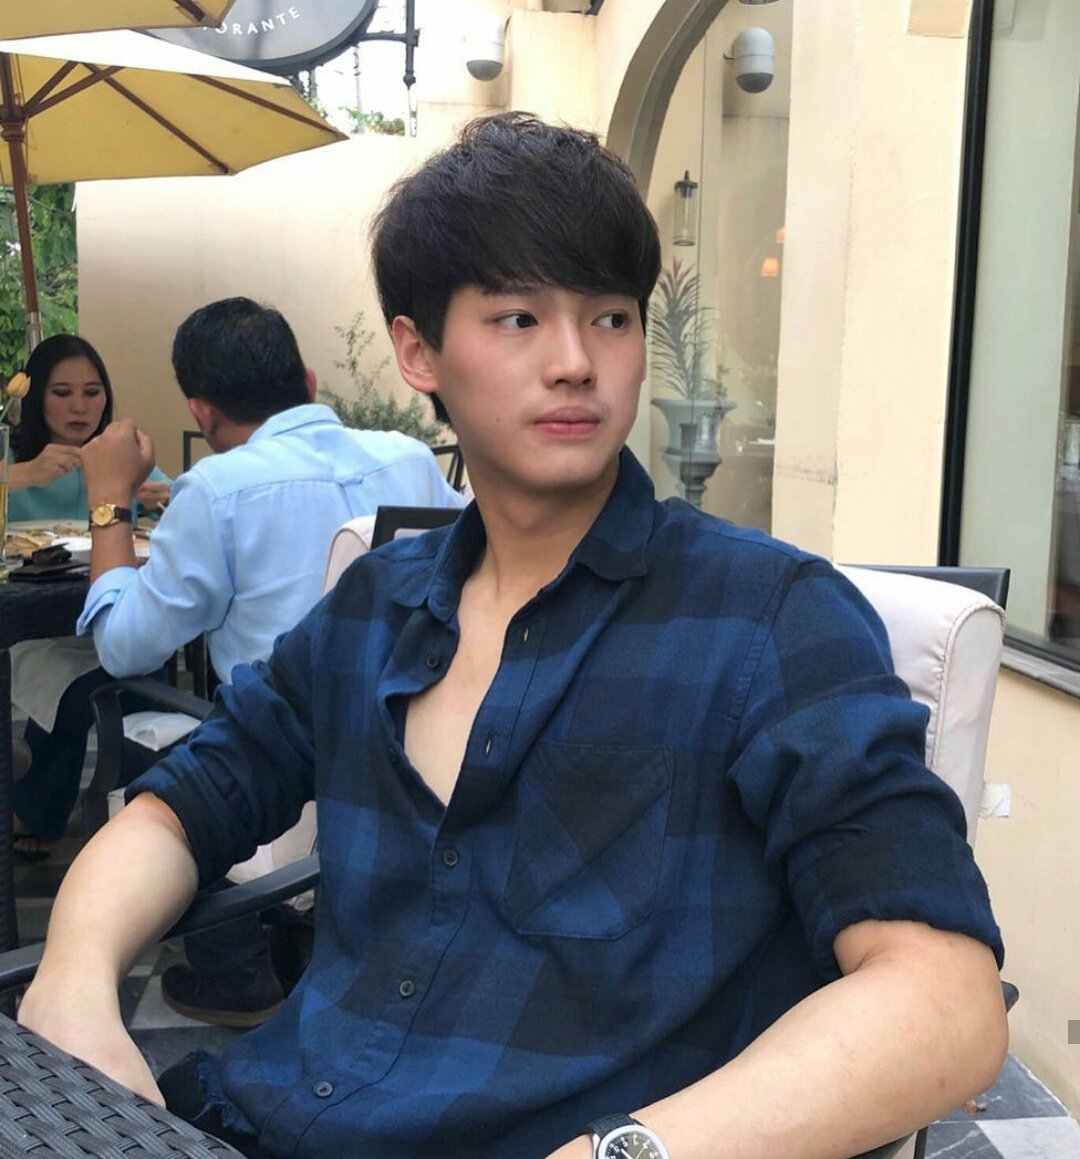 a thread of win metawin but he gets older as you keep scrolling: